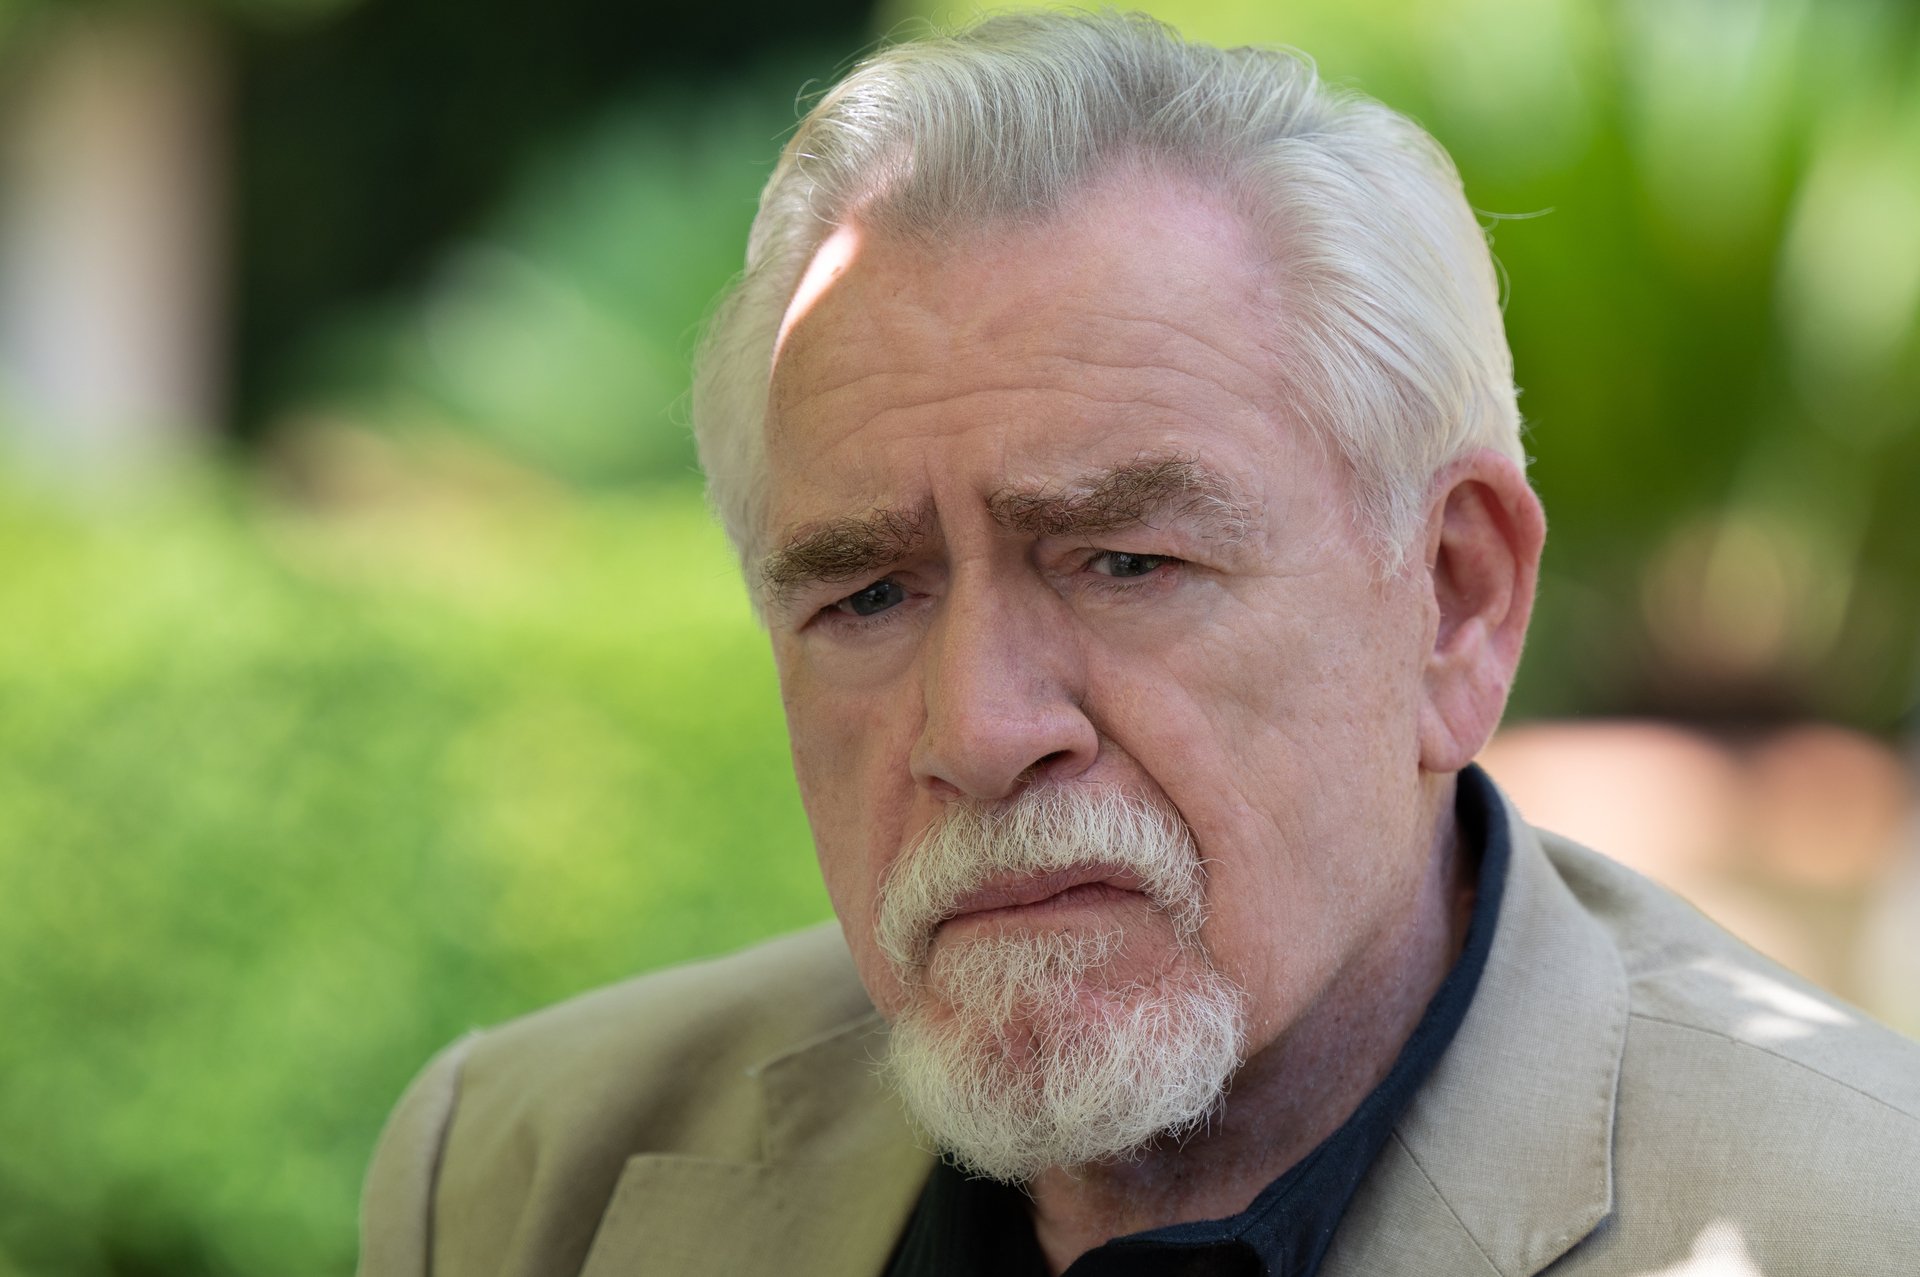 Brian Cox as Logan Roy in 'Succession' Season 3. There's greenery behind him, and he looks like he's thinking.